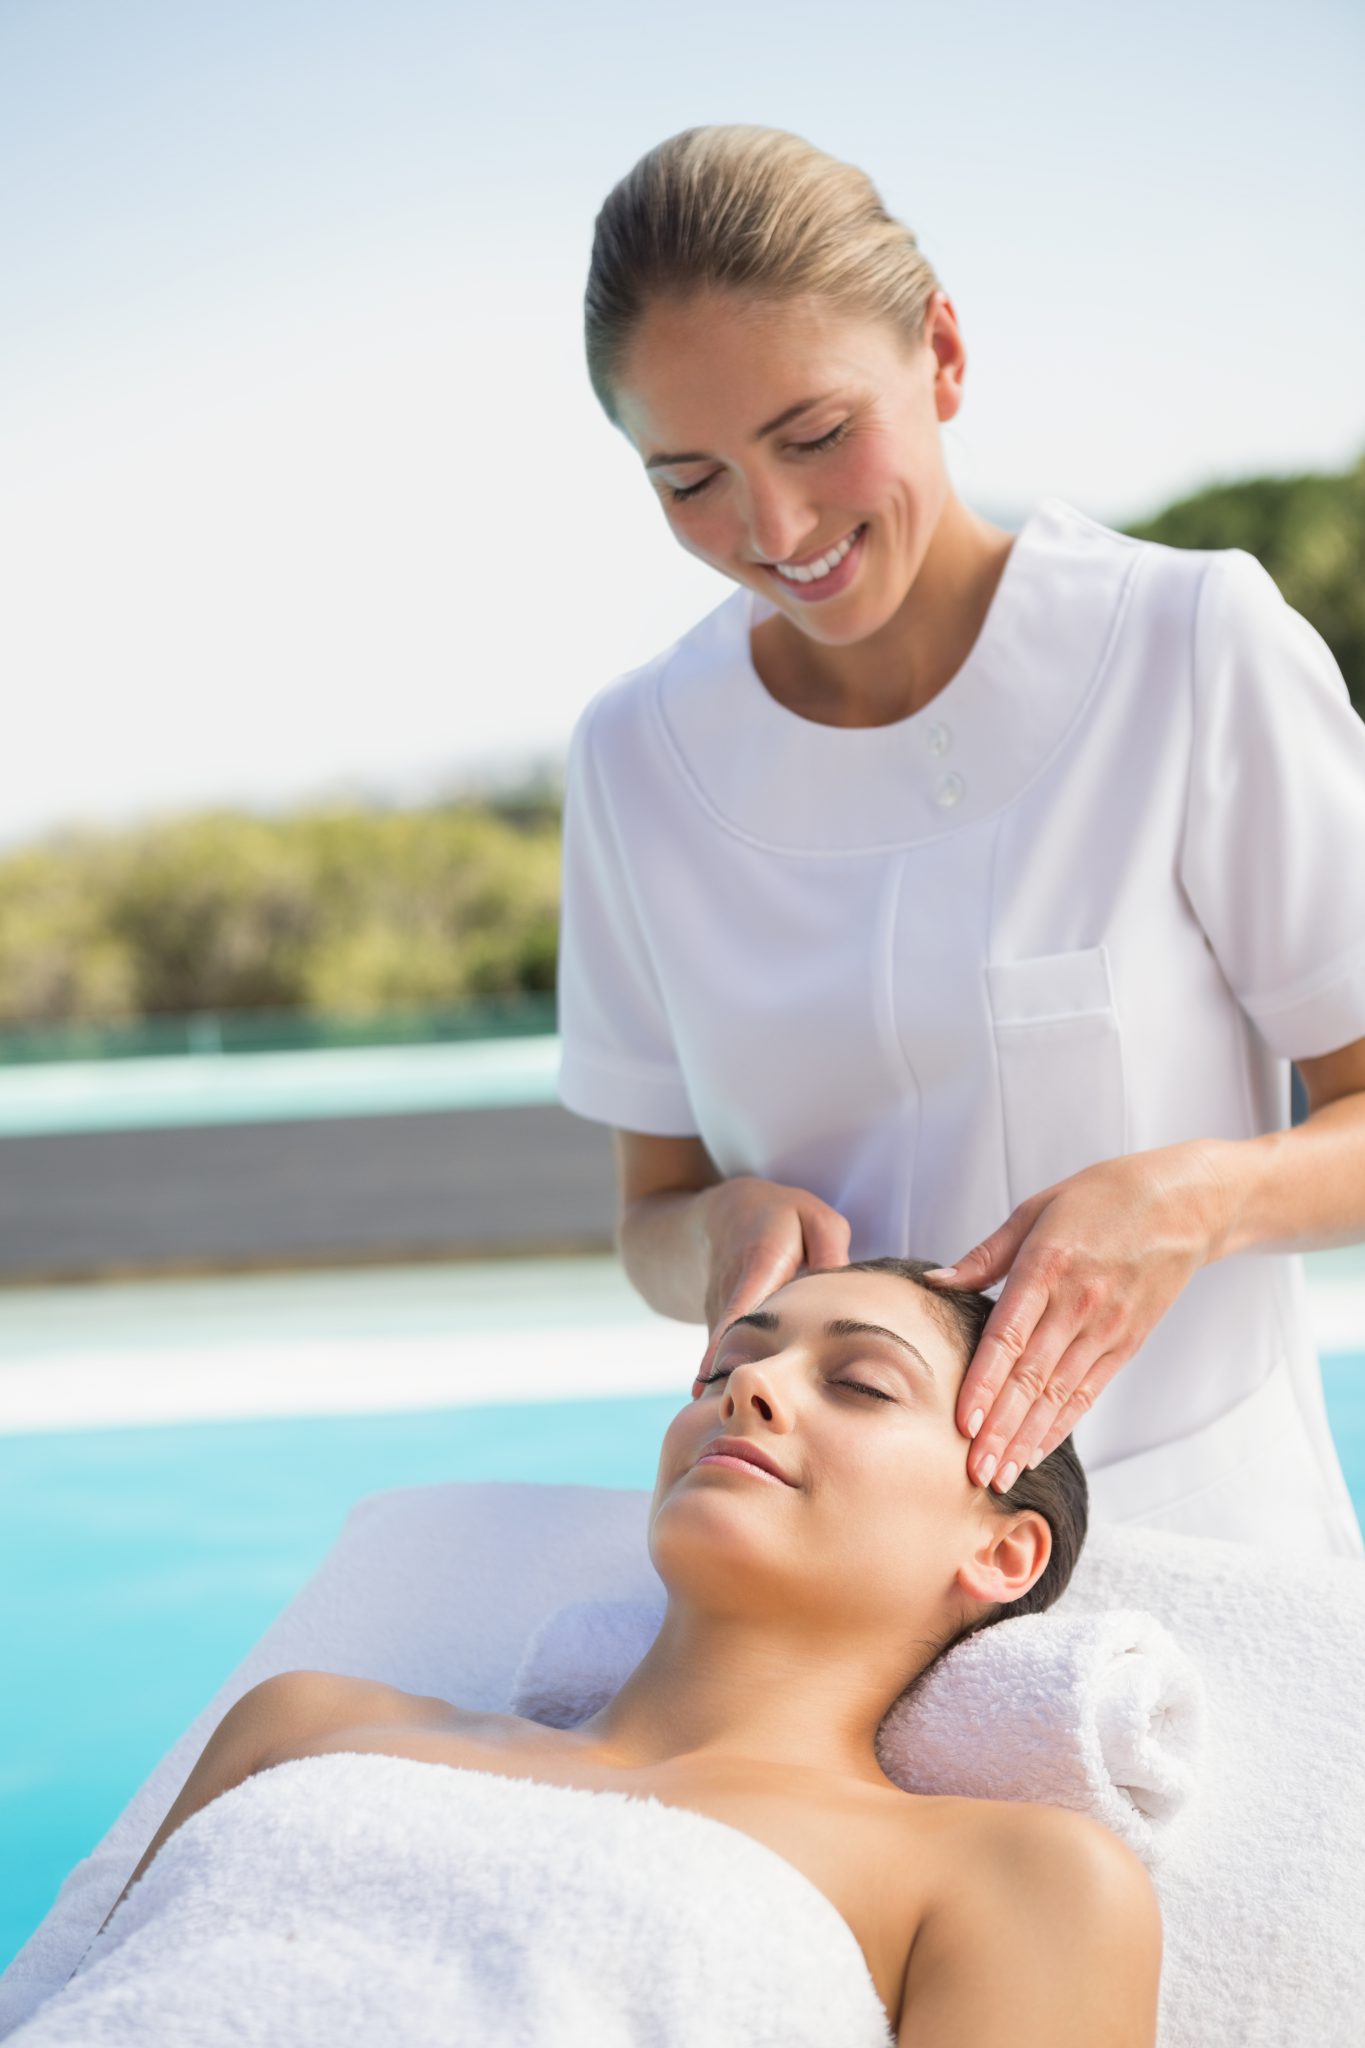 Massage Therapy Training In Baton Rouge Medical Training College 3912